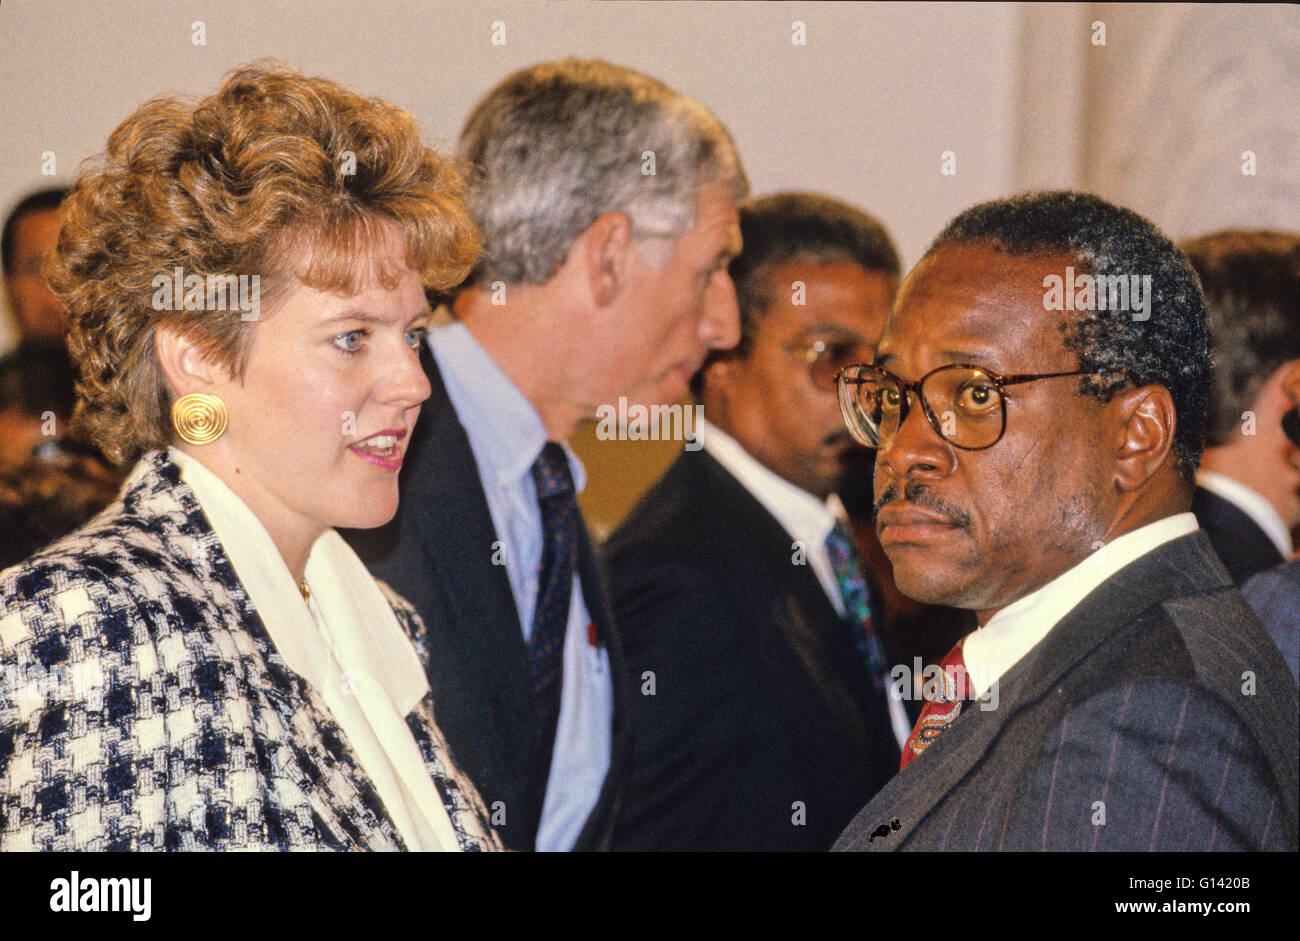 Virginia Thomas, left, and Judge Clarence Thomas, right, during a break in the testimony of Professor Anita Hill as Hill testifies before the United States Senate Judiciary Committee on Judge Thomas' confirmation to be Associate Justice of the US Supreme Court in Washington, DC on October 11, 1991. US Senator John Danforth (Republican of Missouri) is at the center of the image. Credit: Arnie Sachs/CNP Stock Photo